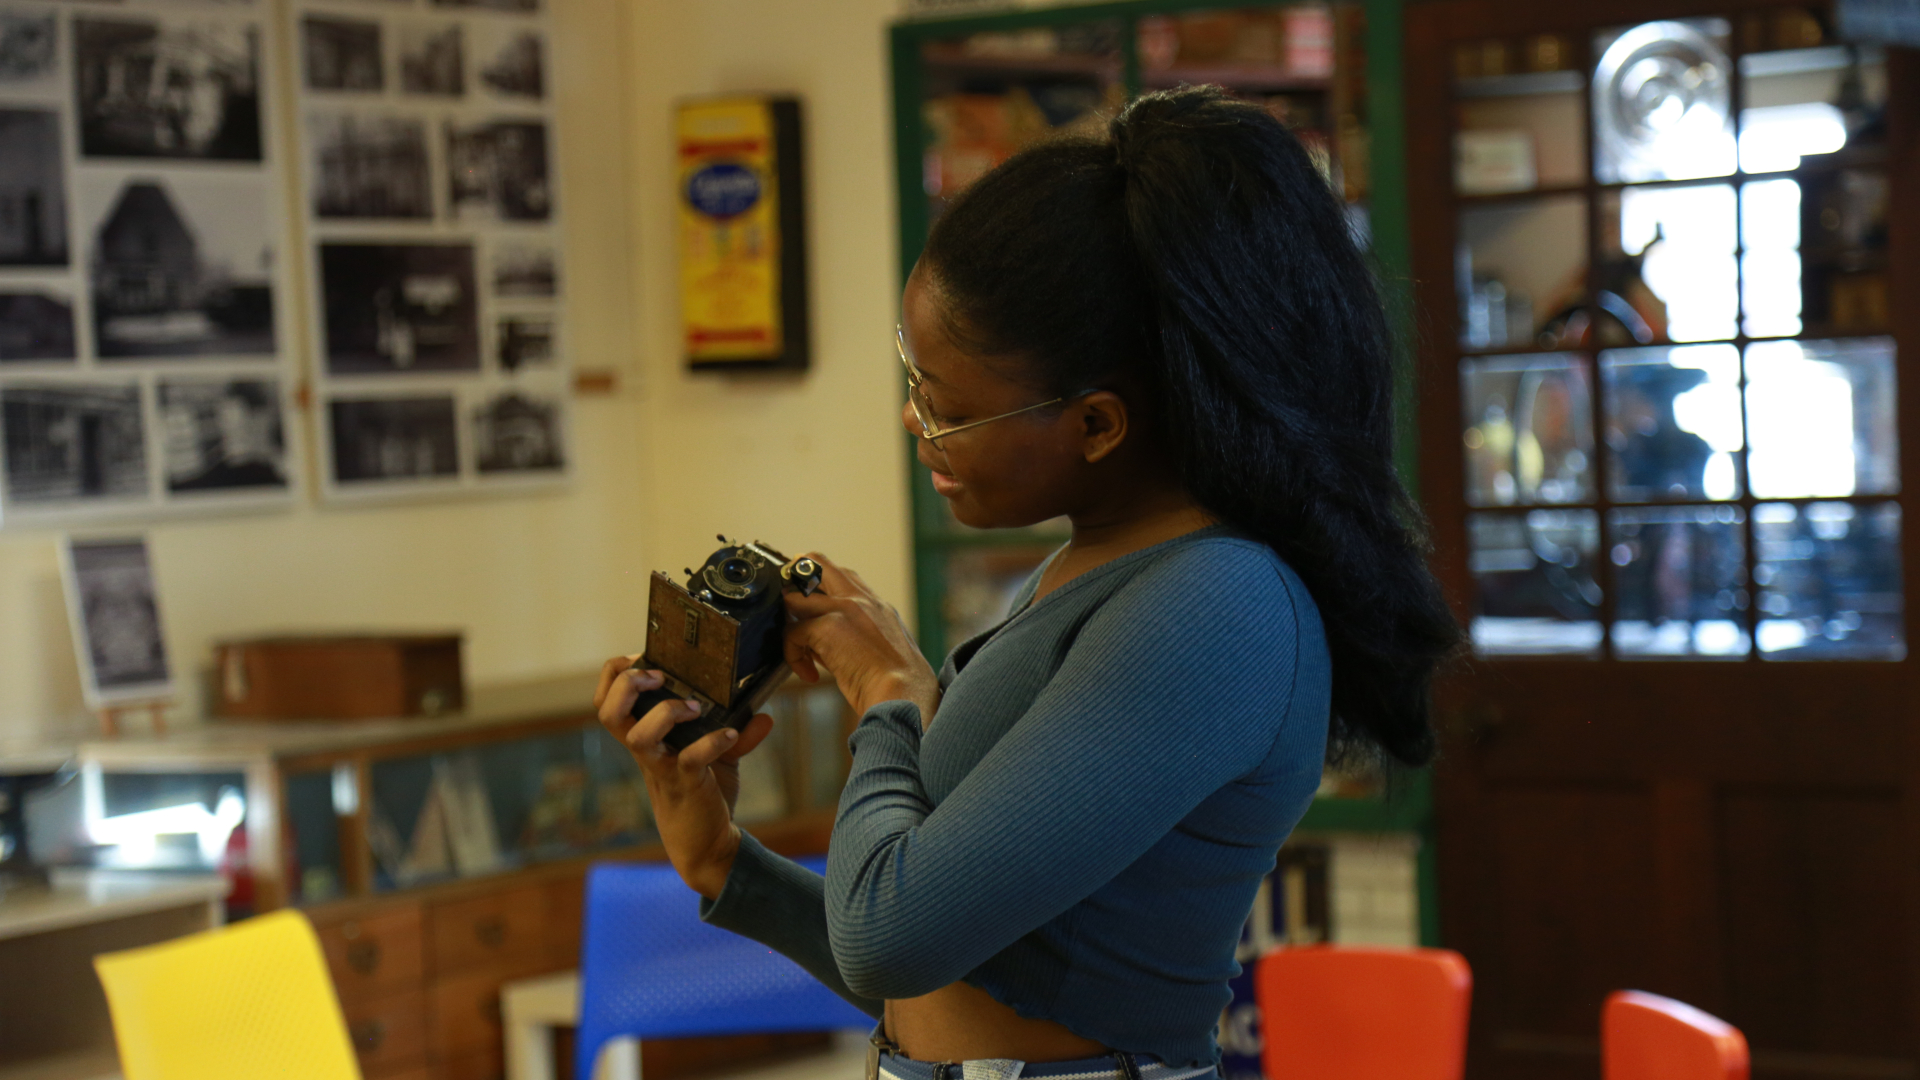 Film director and producer, Alessia Mavakala. In the picture I’m holding a very old camera, found at the Burwell Museum. My friend and co-worker captured my joy, while we were recording footage for the short documentary ‘Balik Arts in Burwell’. Photography: Oykü Vidinli.